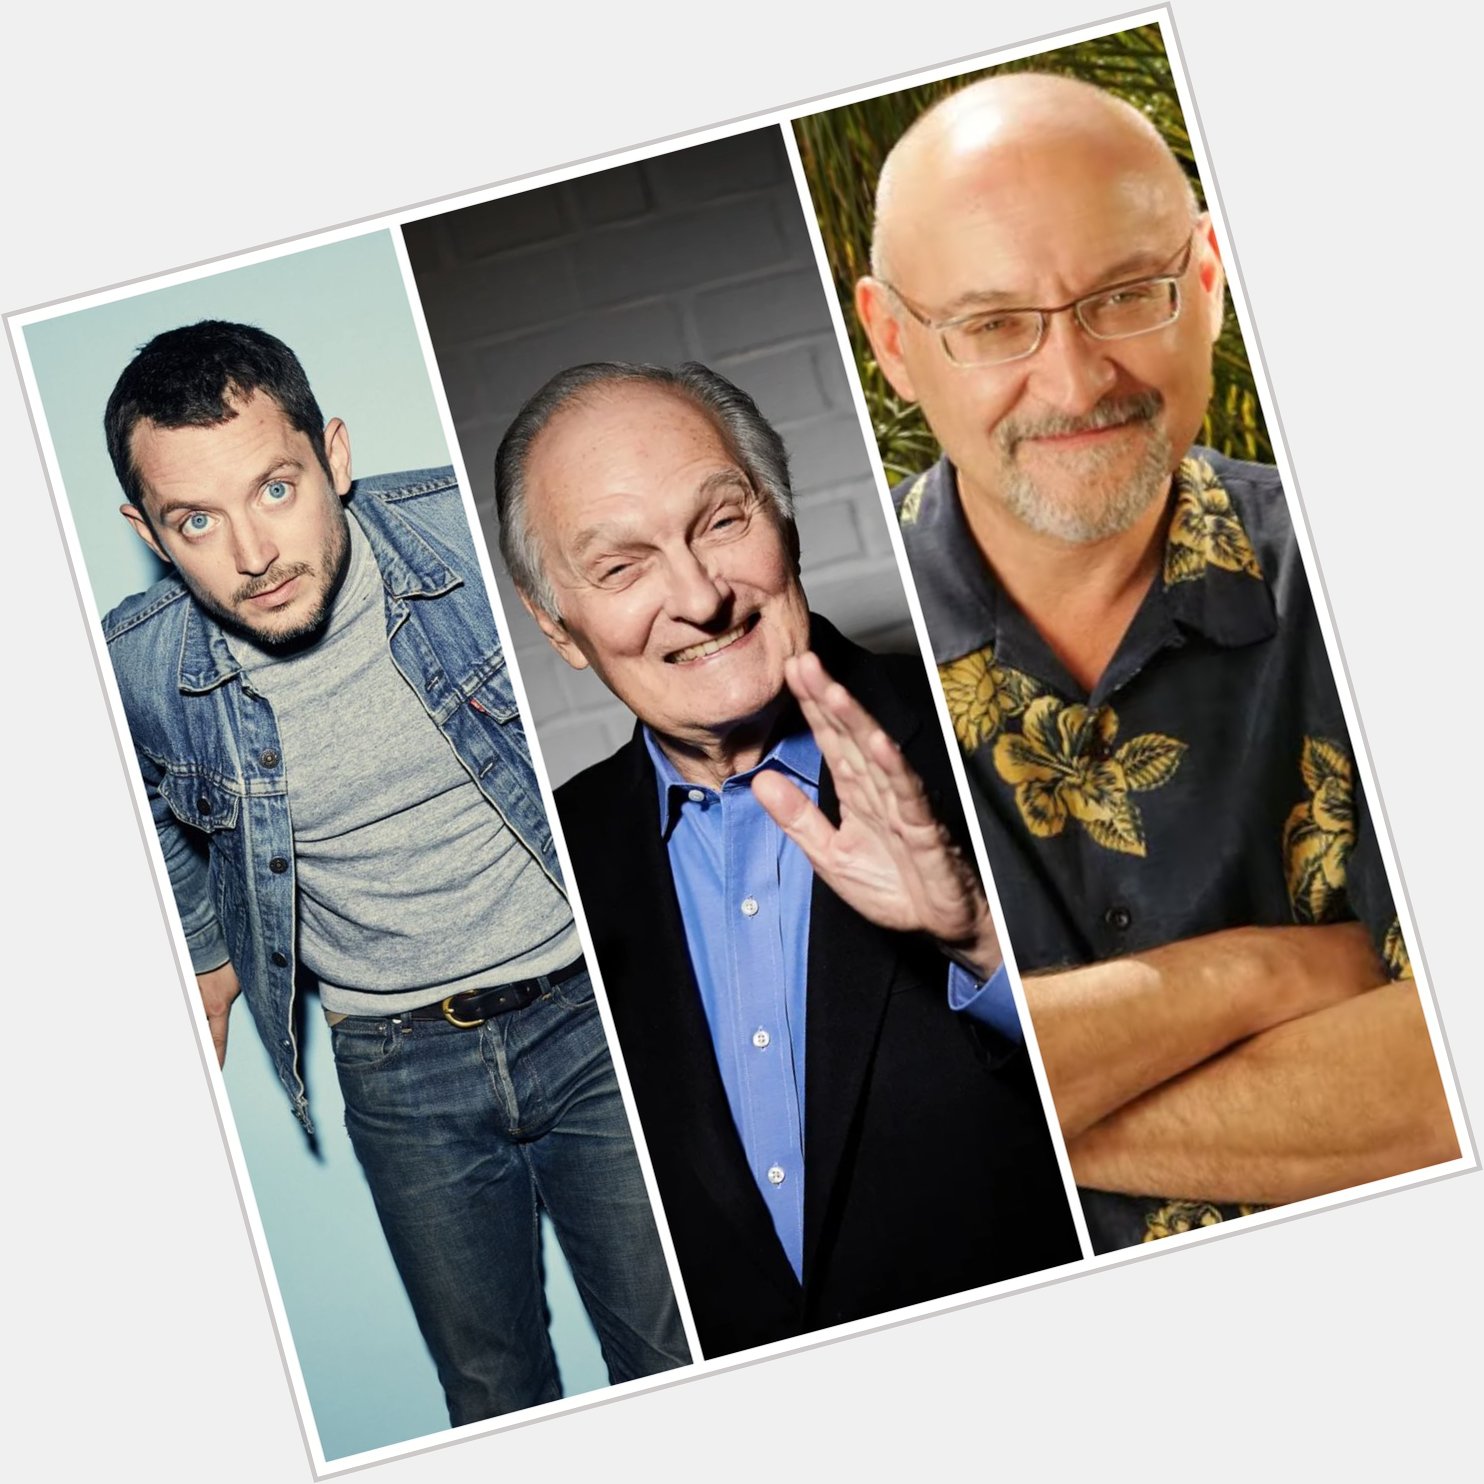 Wishing a Happy Birthday to Actors  and Filmmaker Frank Darabont. 